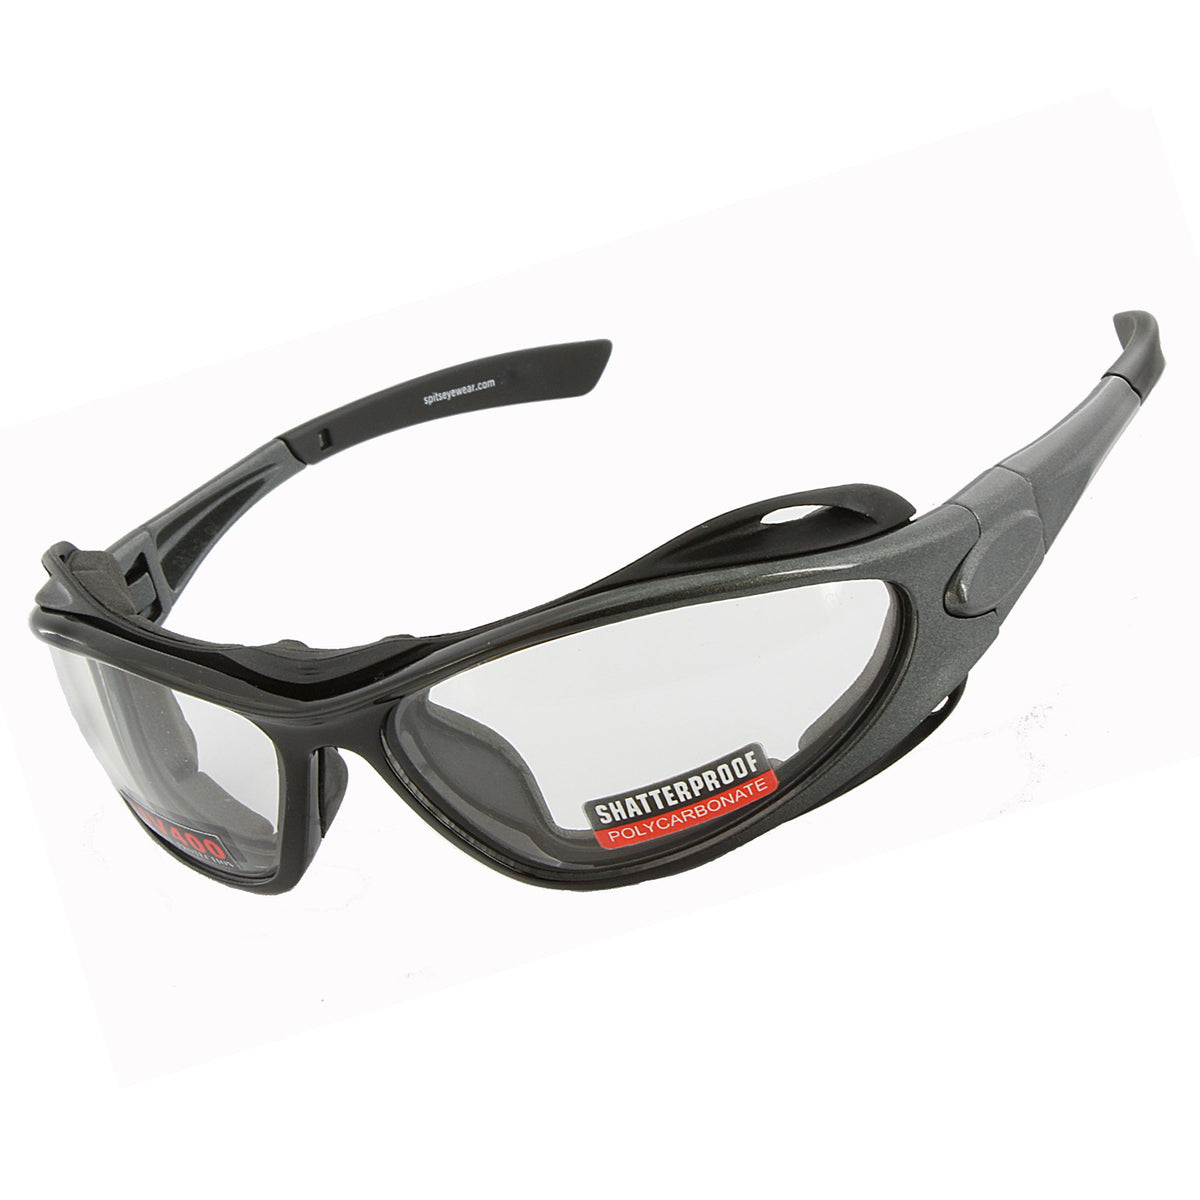 Makos Removable Foam Padding Motorcycle Sunglasses, Convert To Goggles